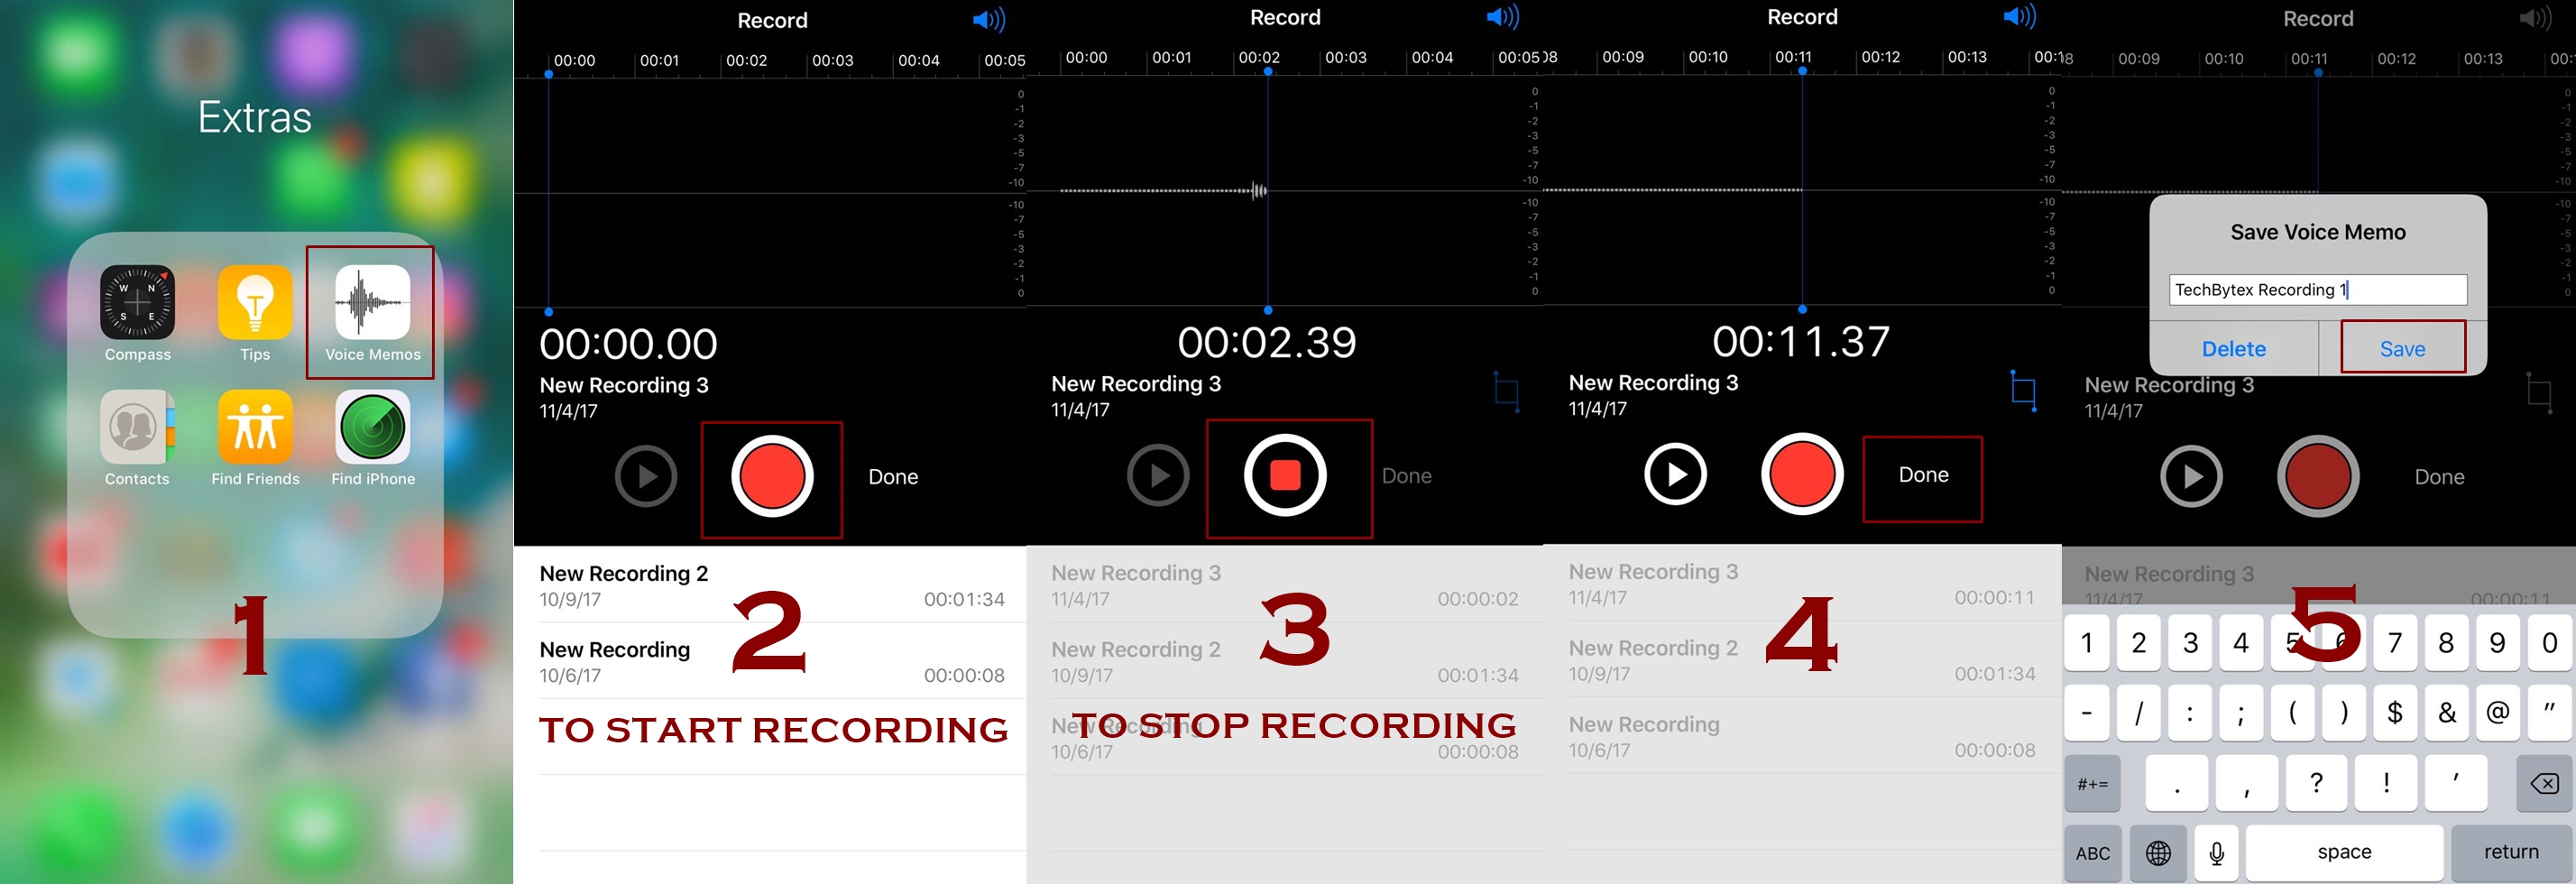 How to use and record voice memos in iPhone | Techbytex ...